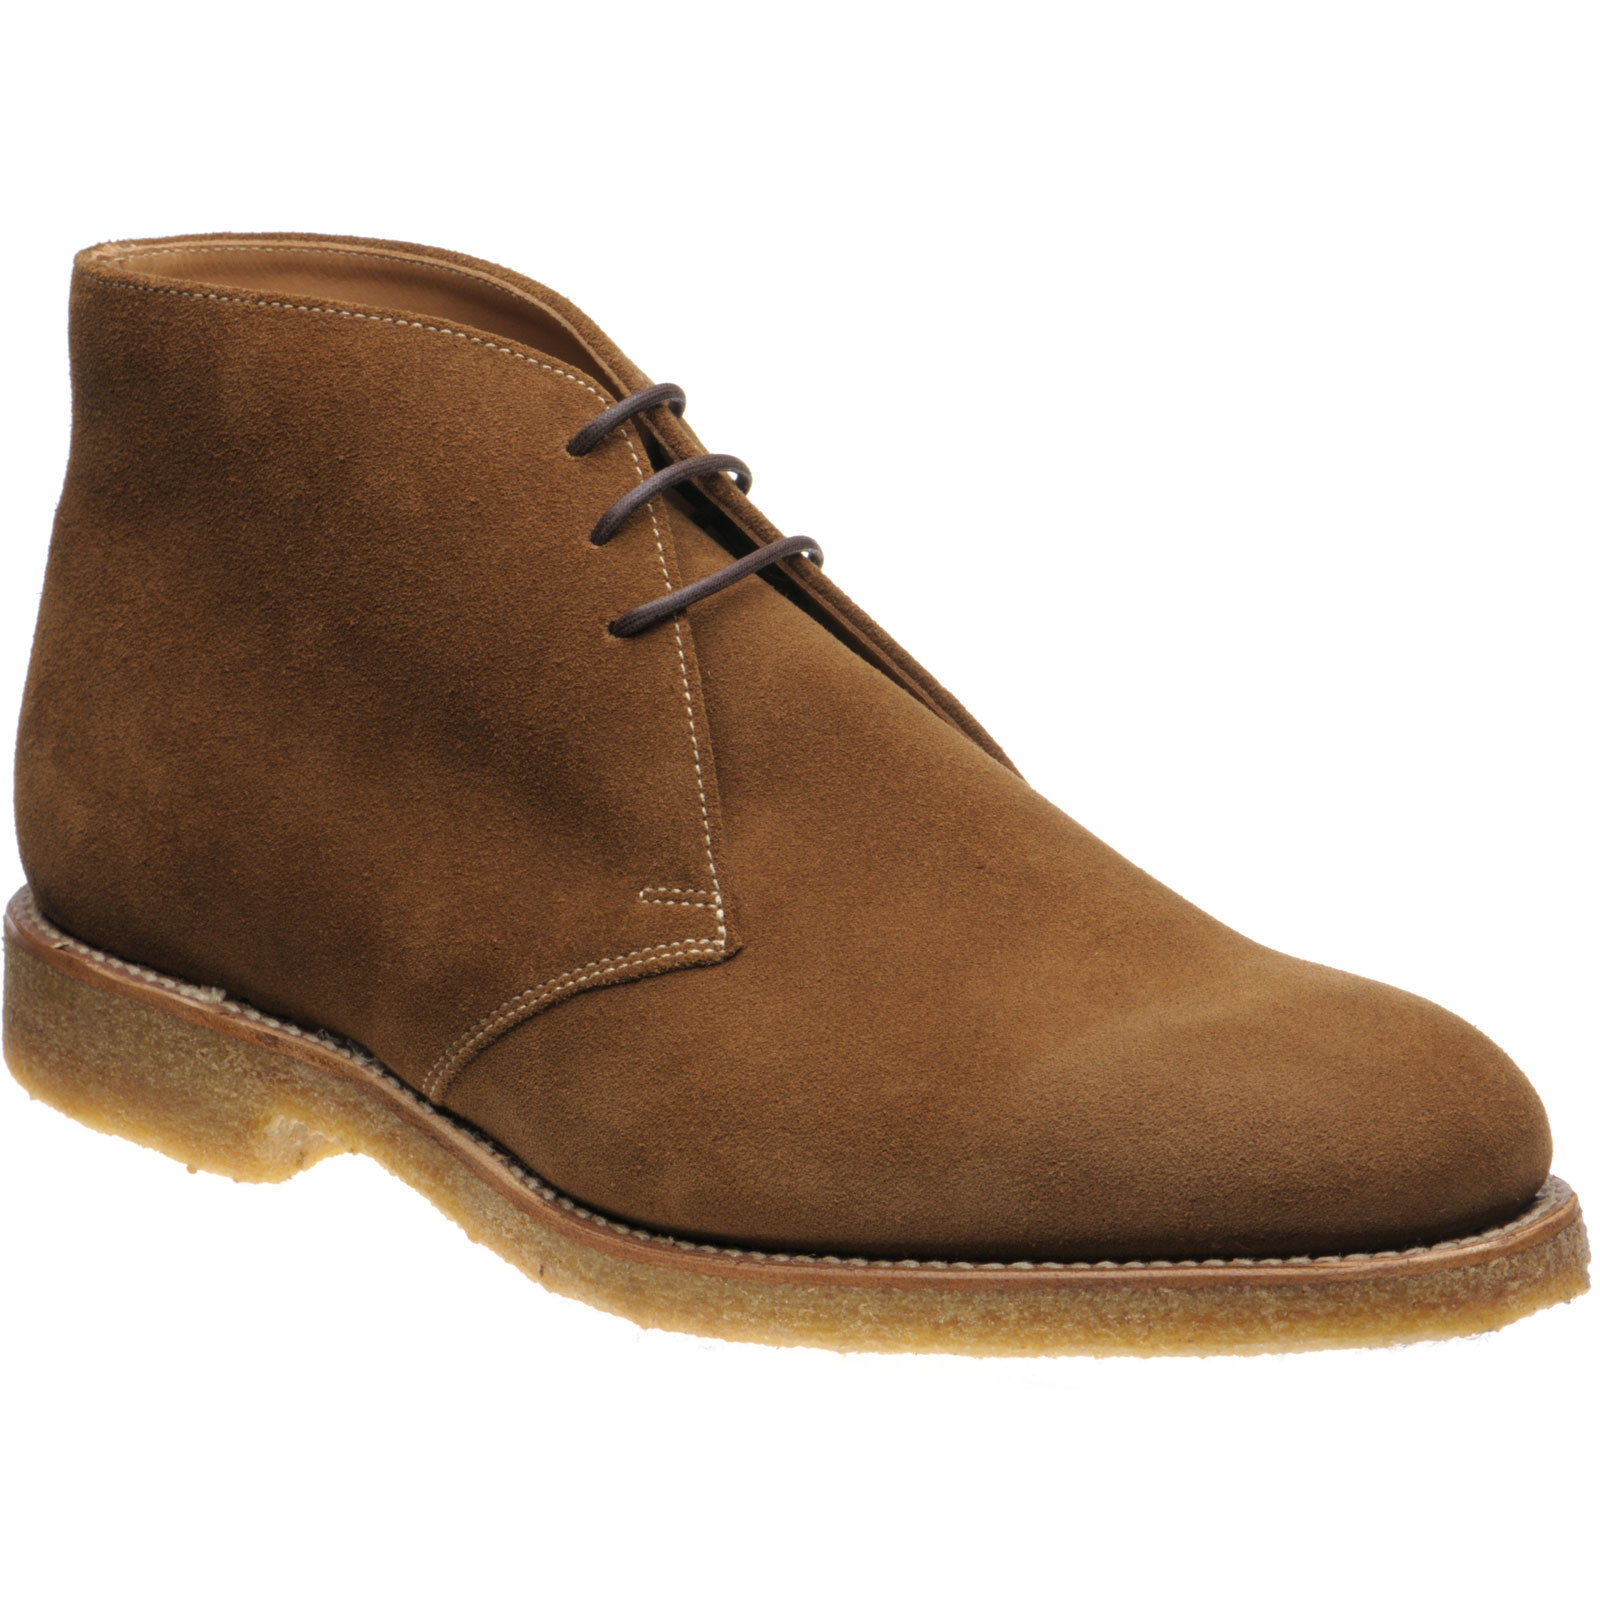 Loake shoes | Loake 1880 | Rivington Chukka boots in Tan Suede at ...